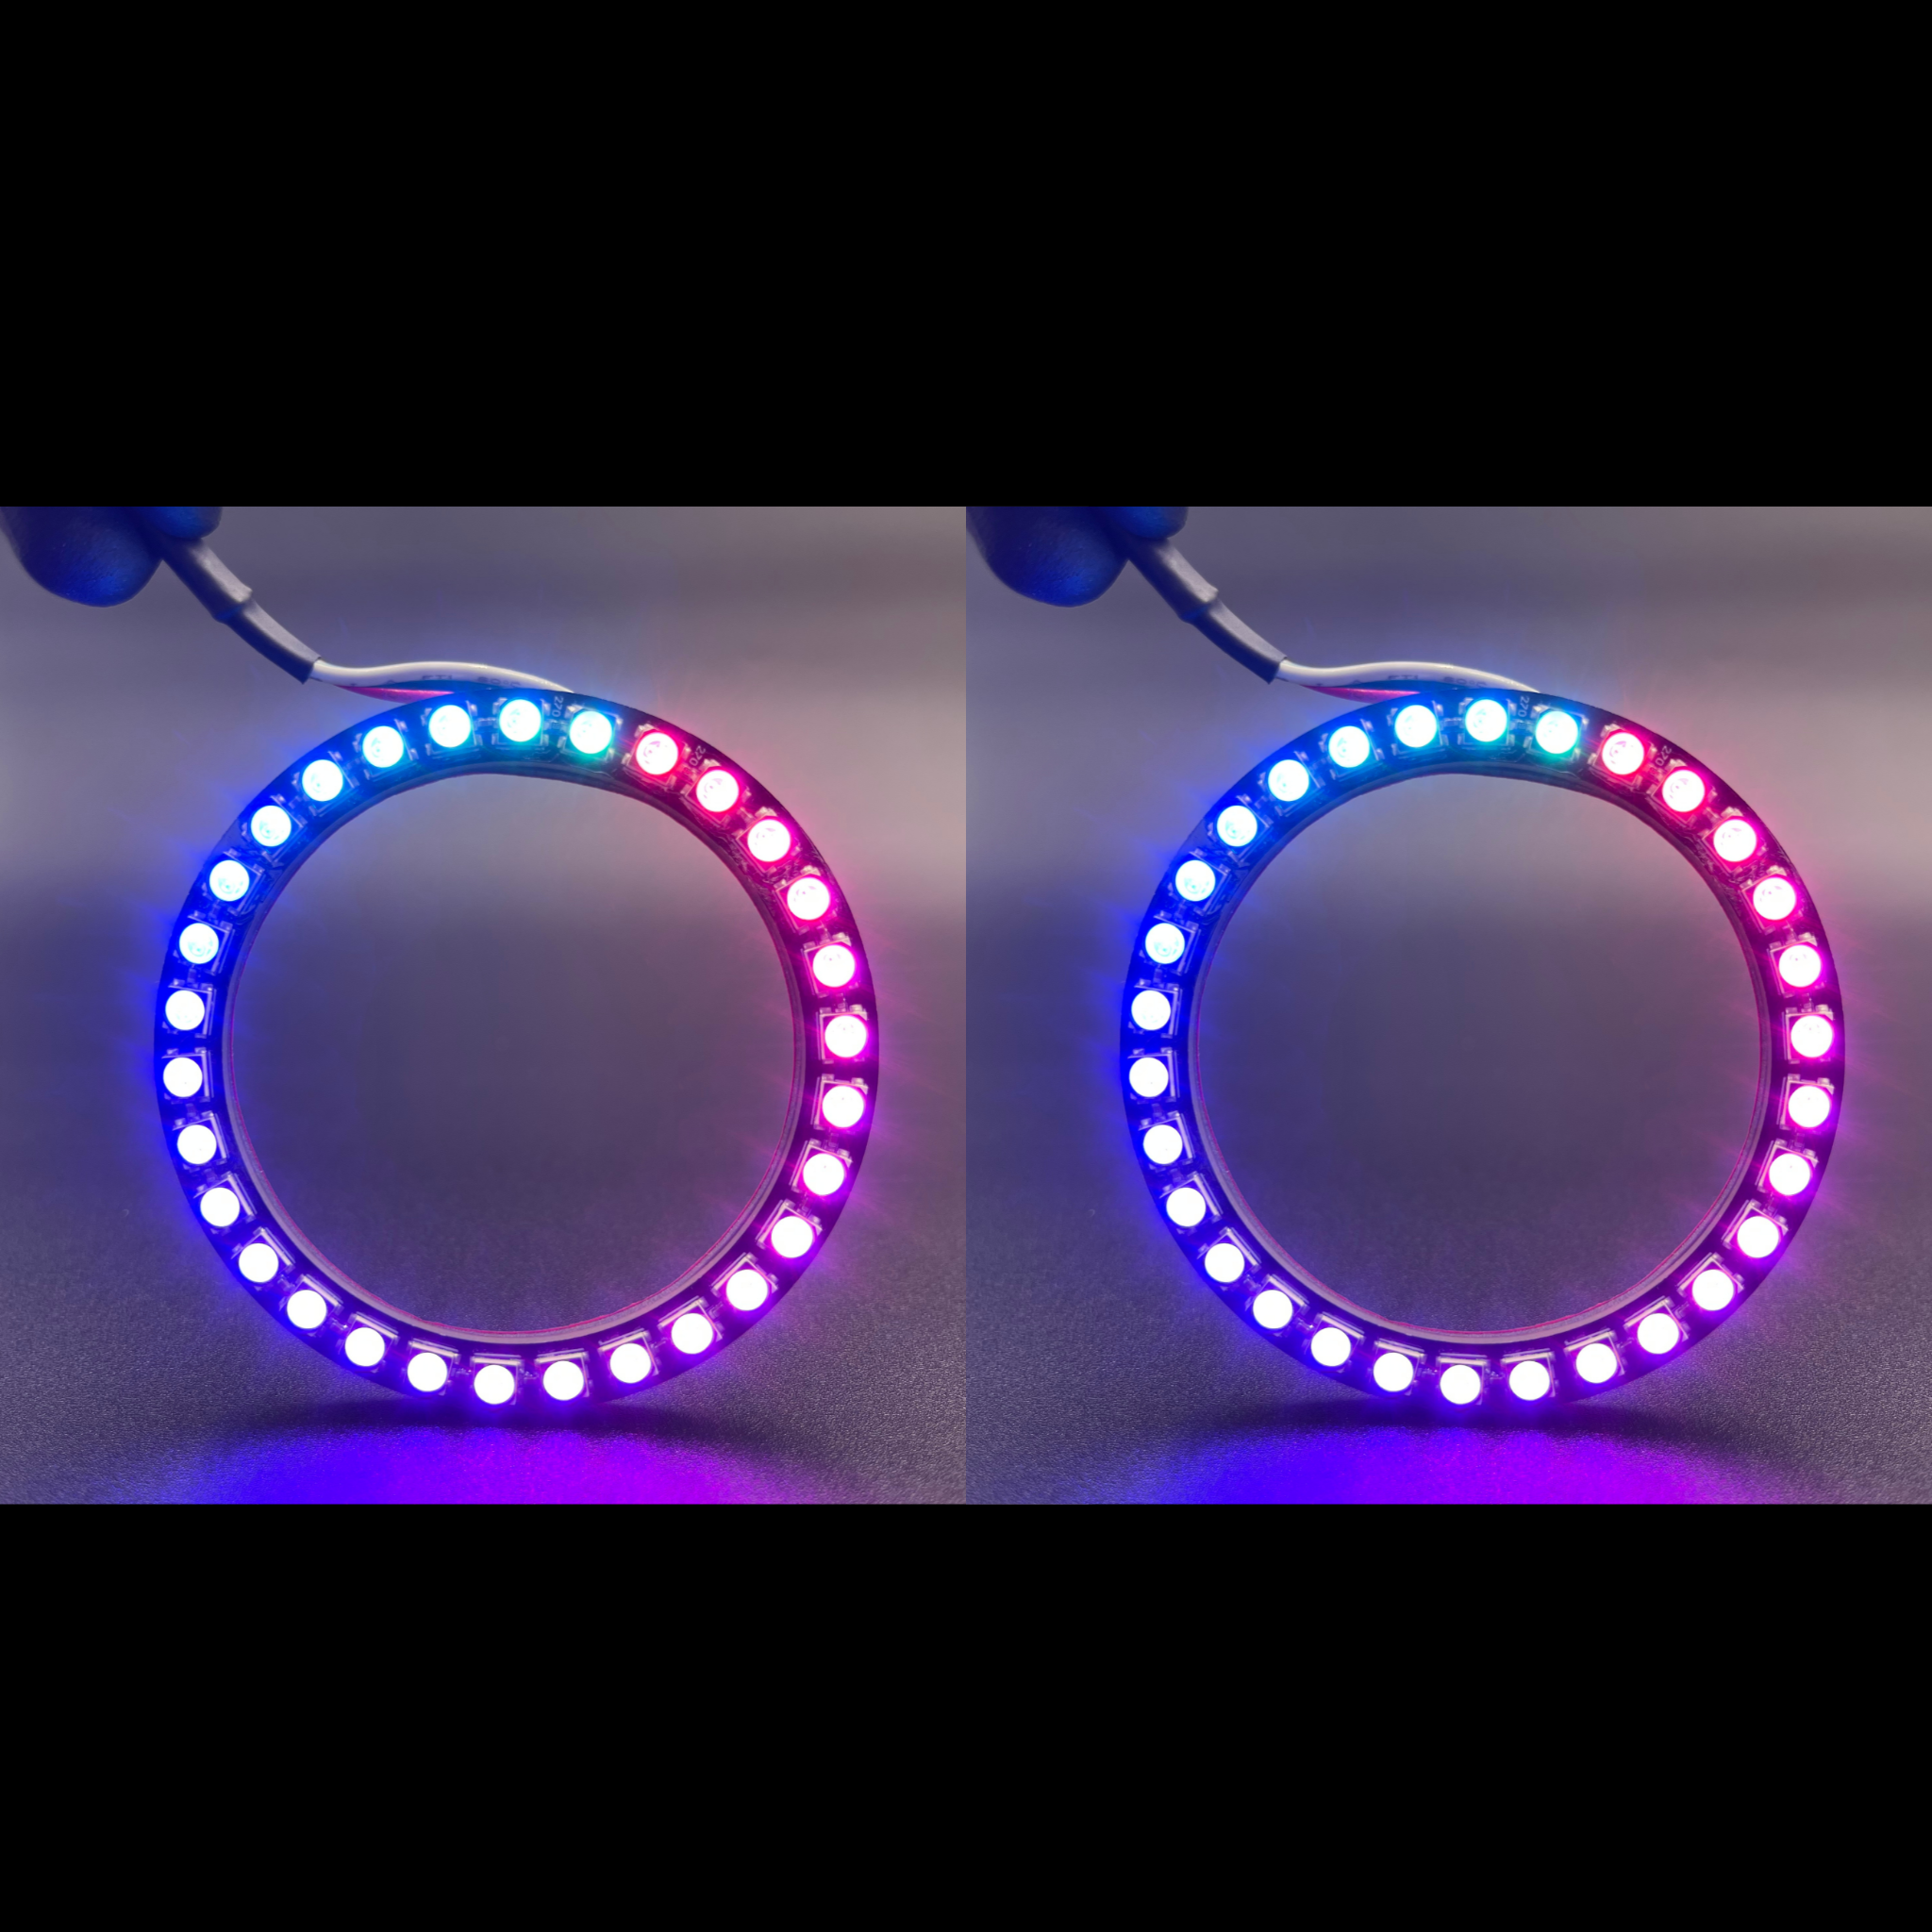 2004-2010 Mercedes CLS W219 Multicolor Halo Kit - RGB Halo Kits Multicolor Flow Series Color Chasing RGBWA LED headlight kit Oracle Lighting Trendz OneUpLighting Morimoto theretrofitsource AutoLEDTech Diode Dynamics